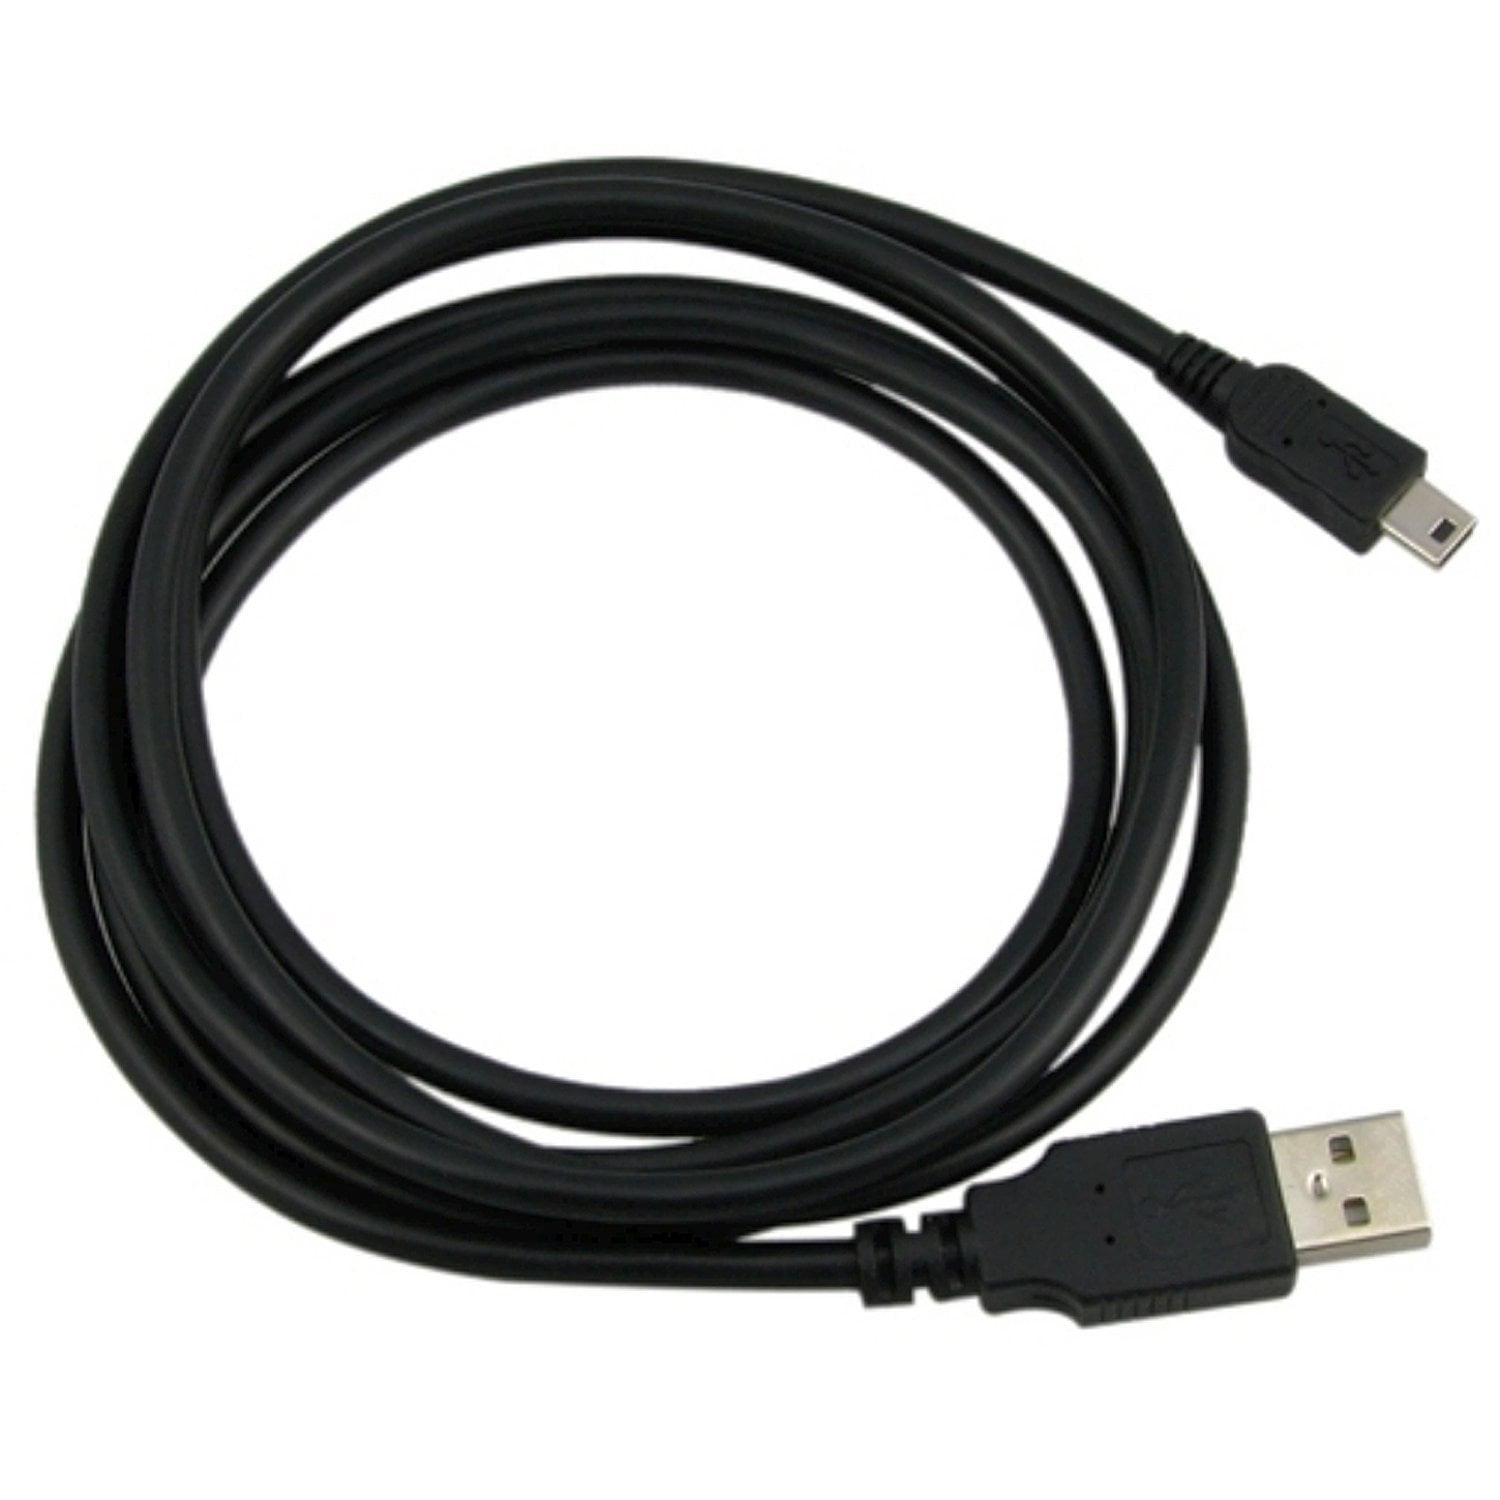 LEAD FOR PC AND MAC SONY  DCR-SR47E,DCR-SR48 CAMERA USB DATA SYNC CABLE 